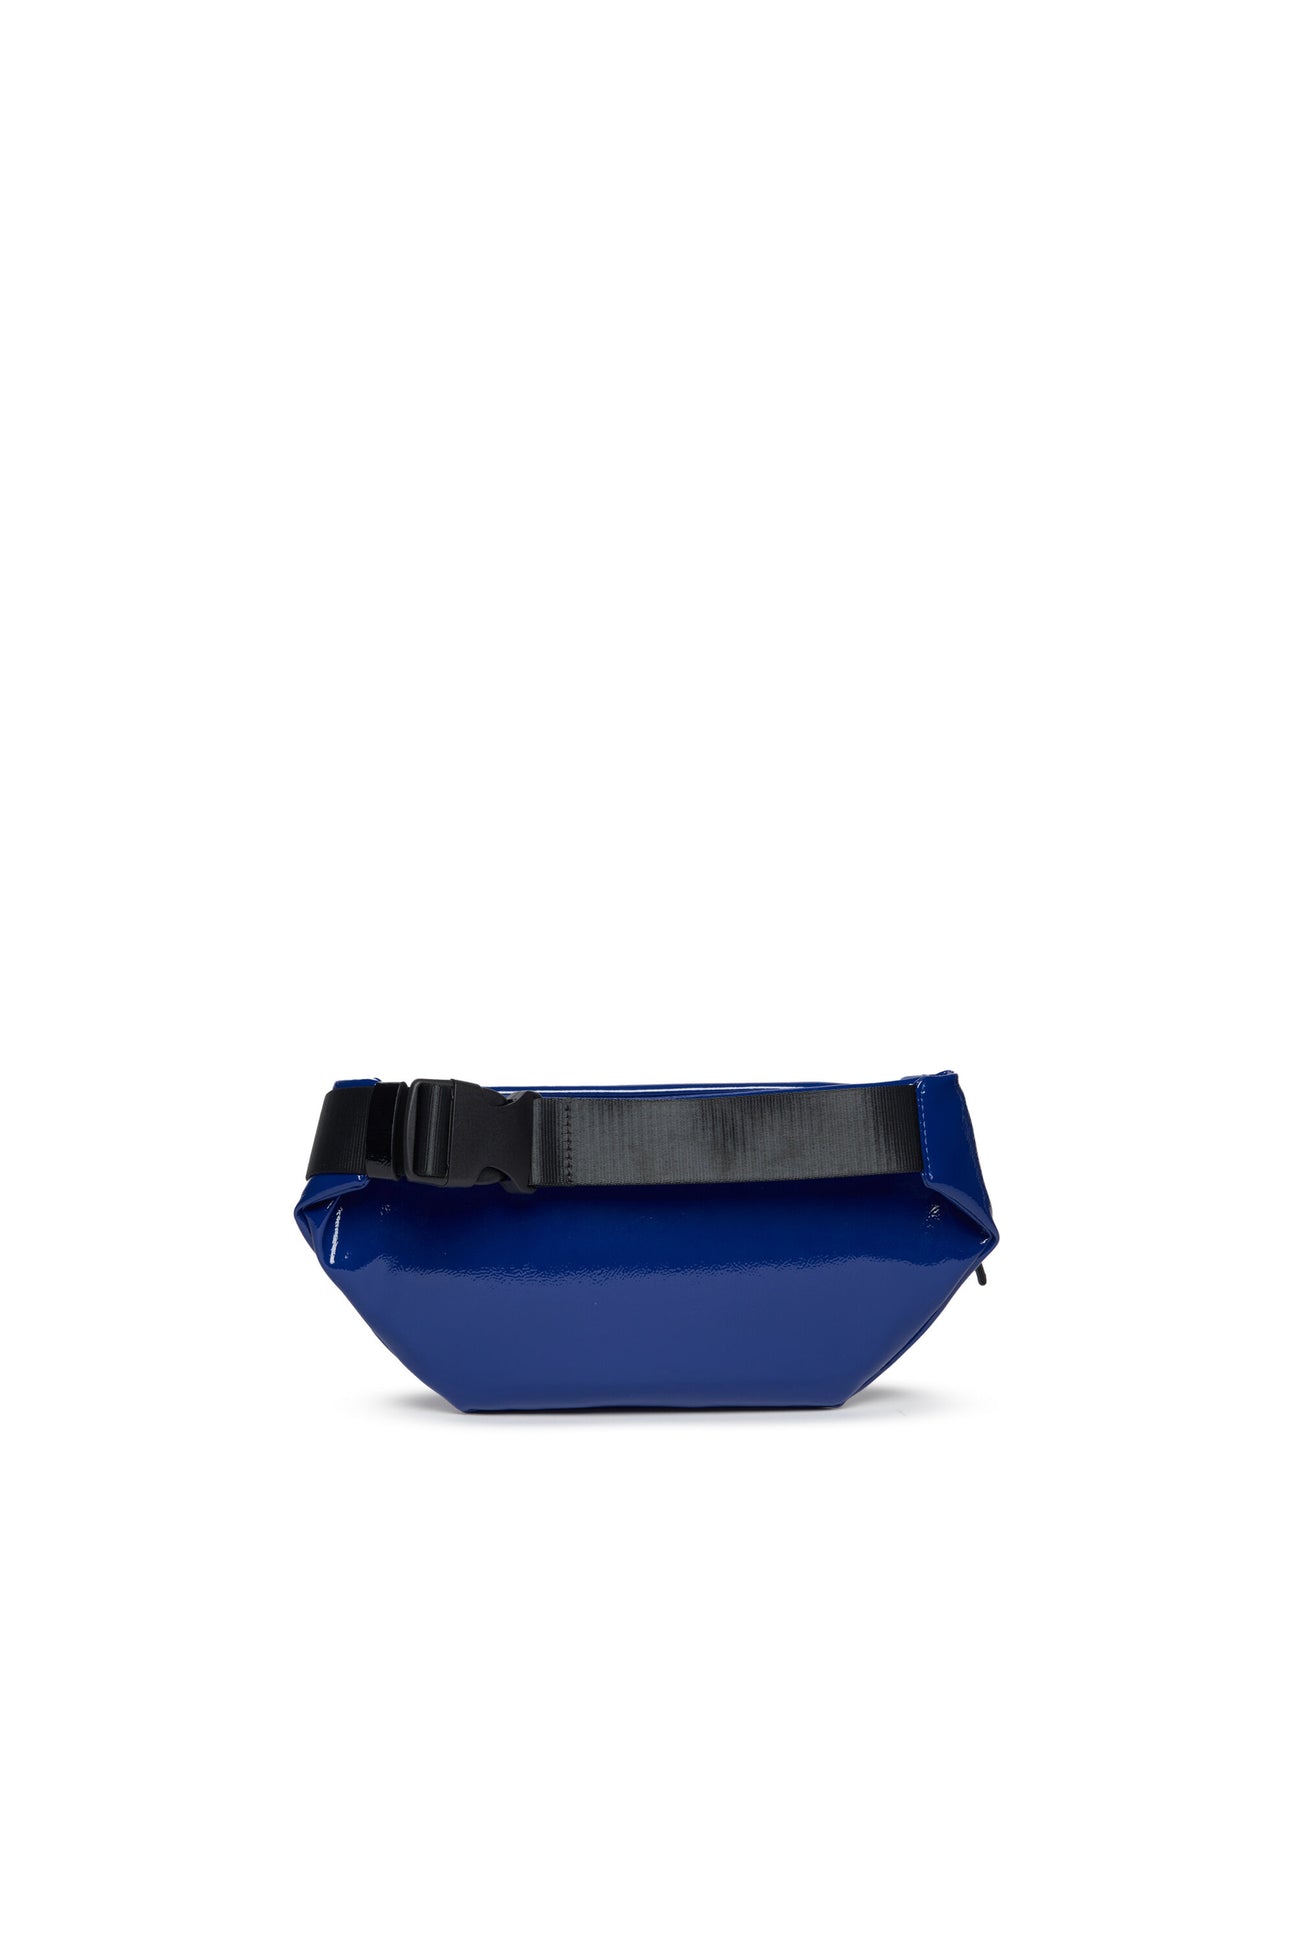 Glossy fanny pack with Wave 1964 graphics Glossy fanny pack with Wave 1964 graphics